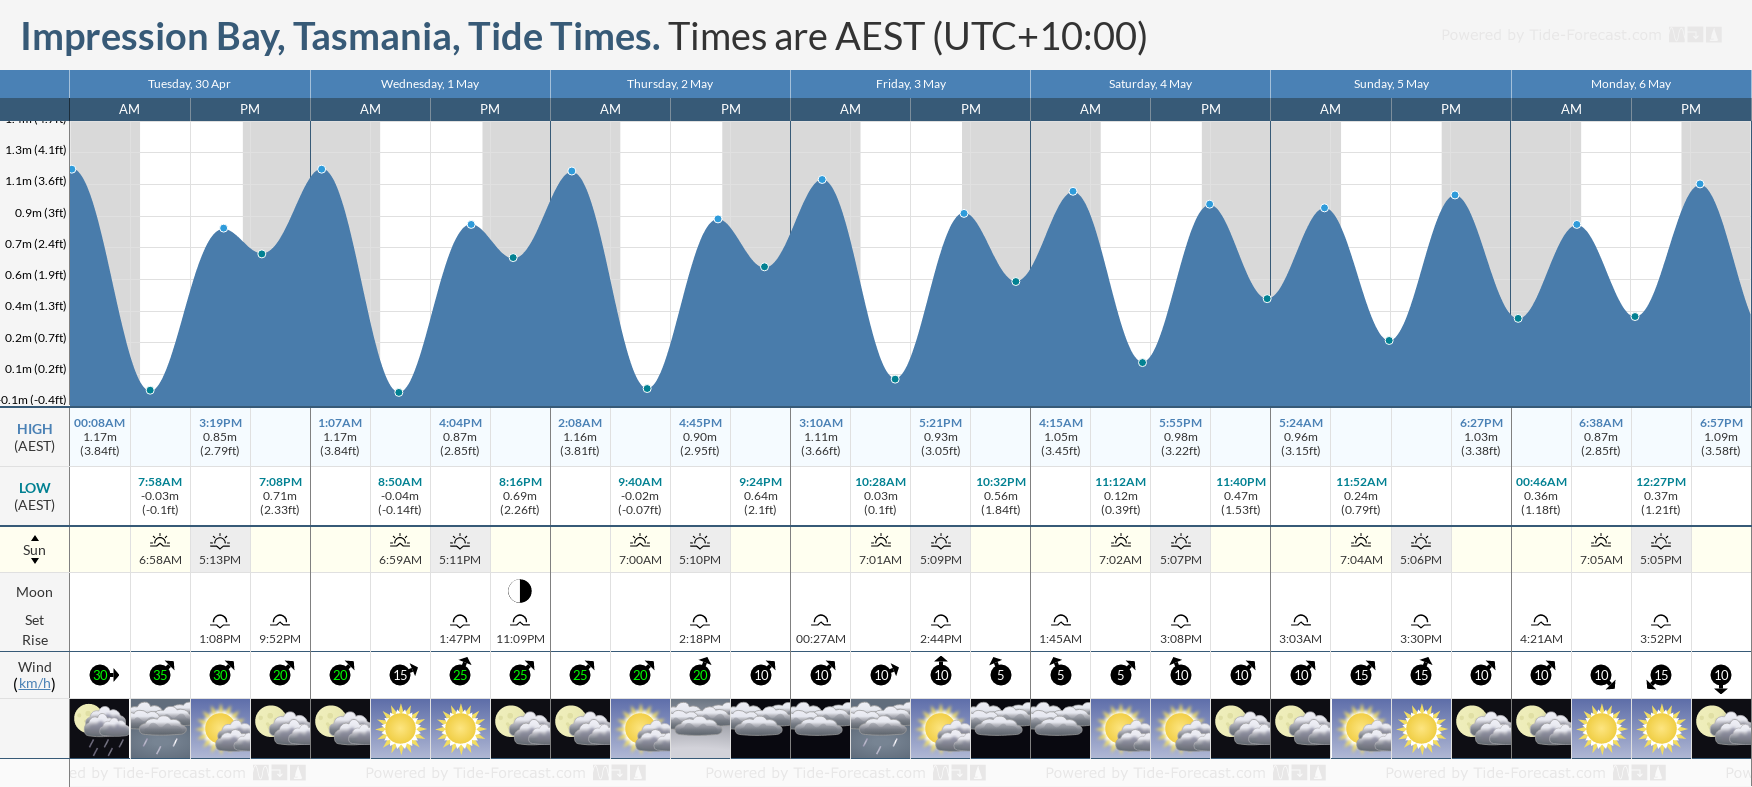 Impression Bay, Tasmania Tide Chart including high and low tide tide times for the next 7 days